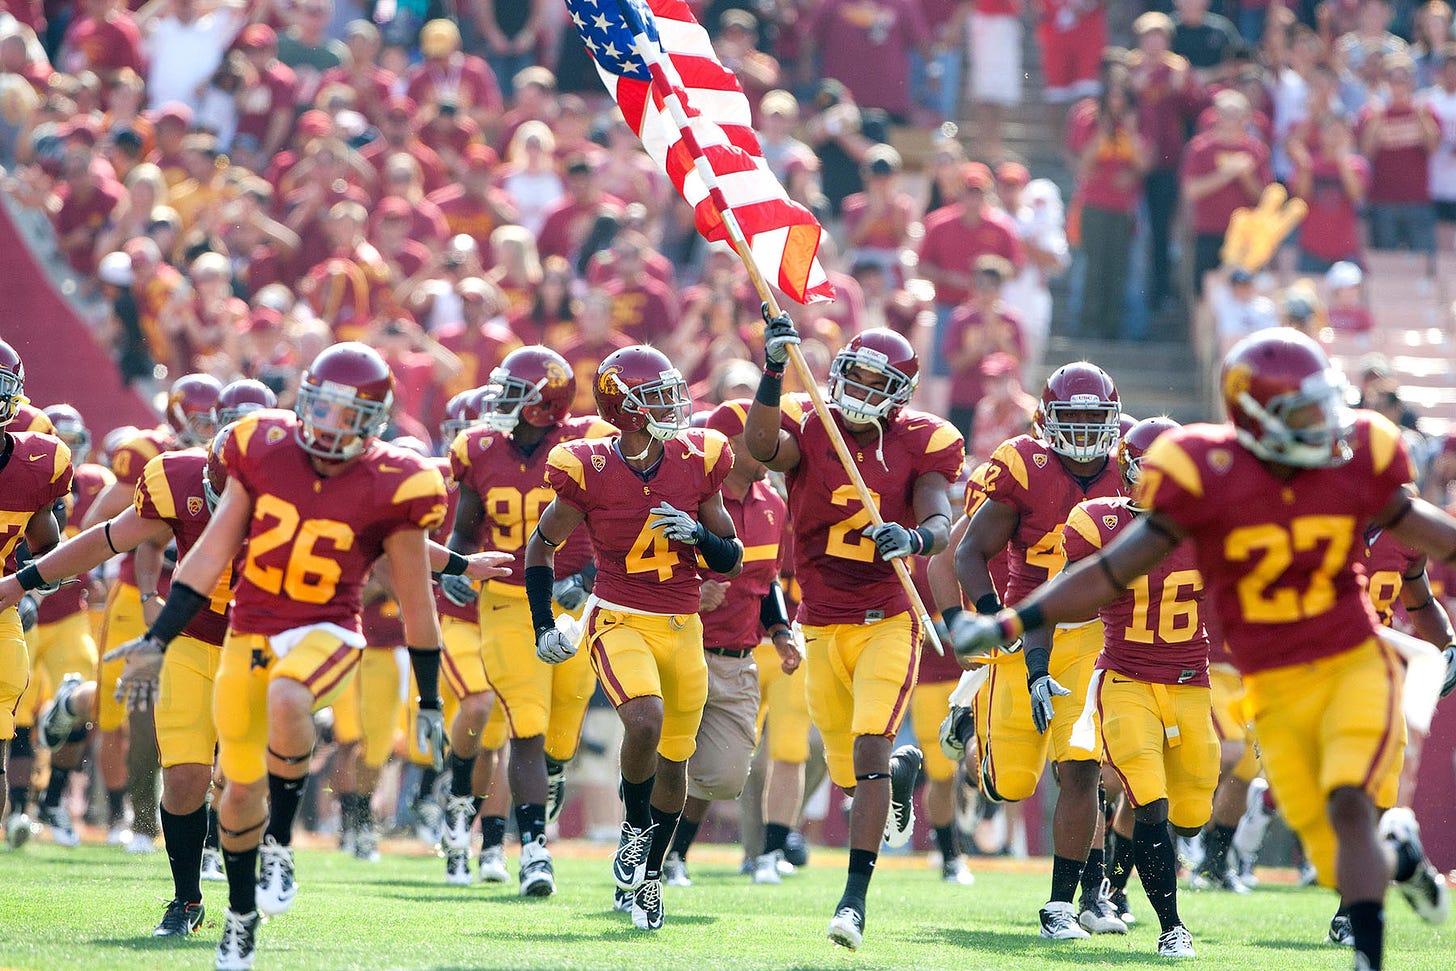 USC to remember 9/11 with observance at Saturday's football game